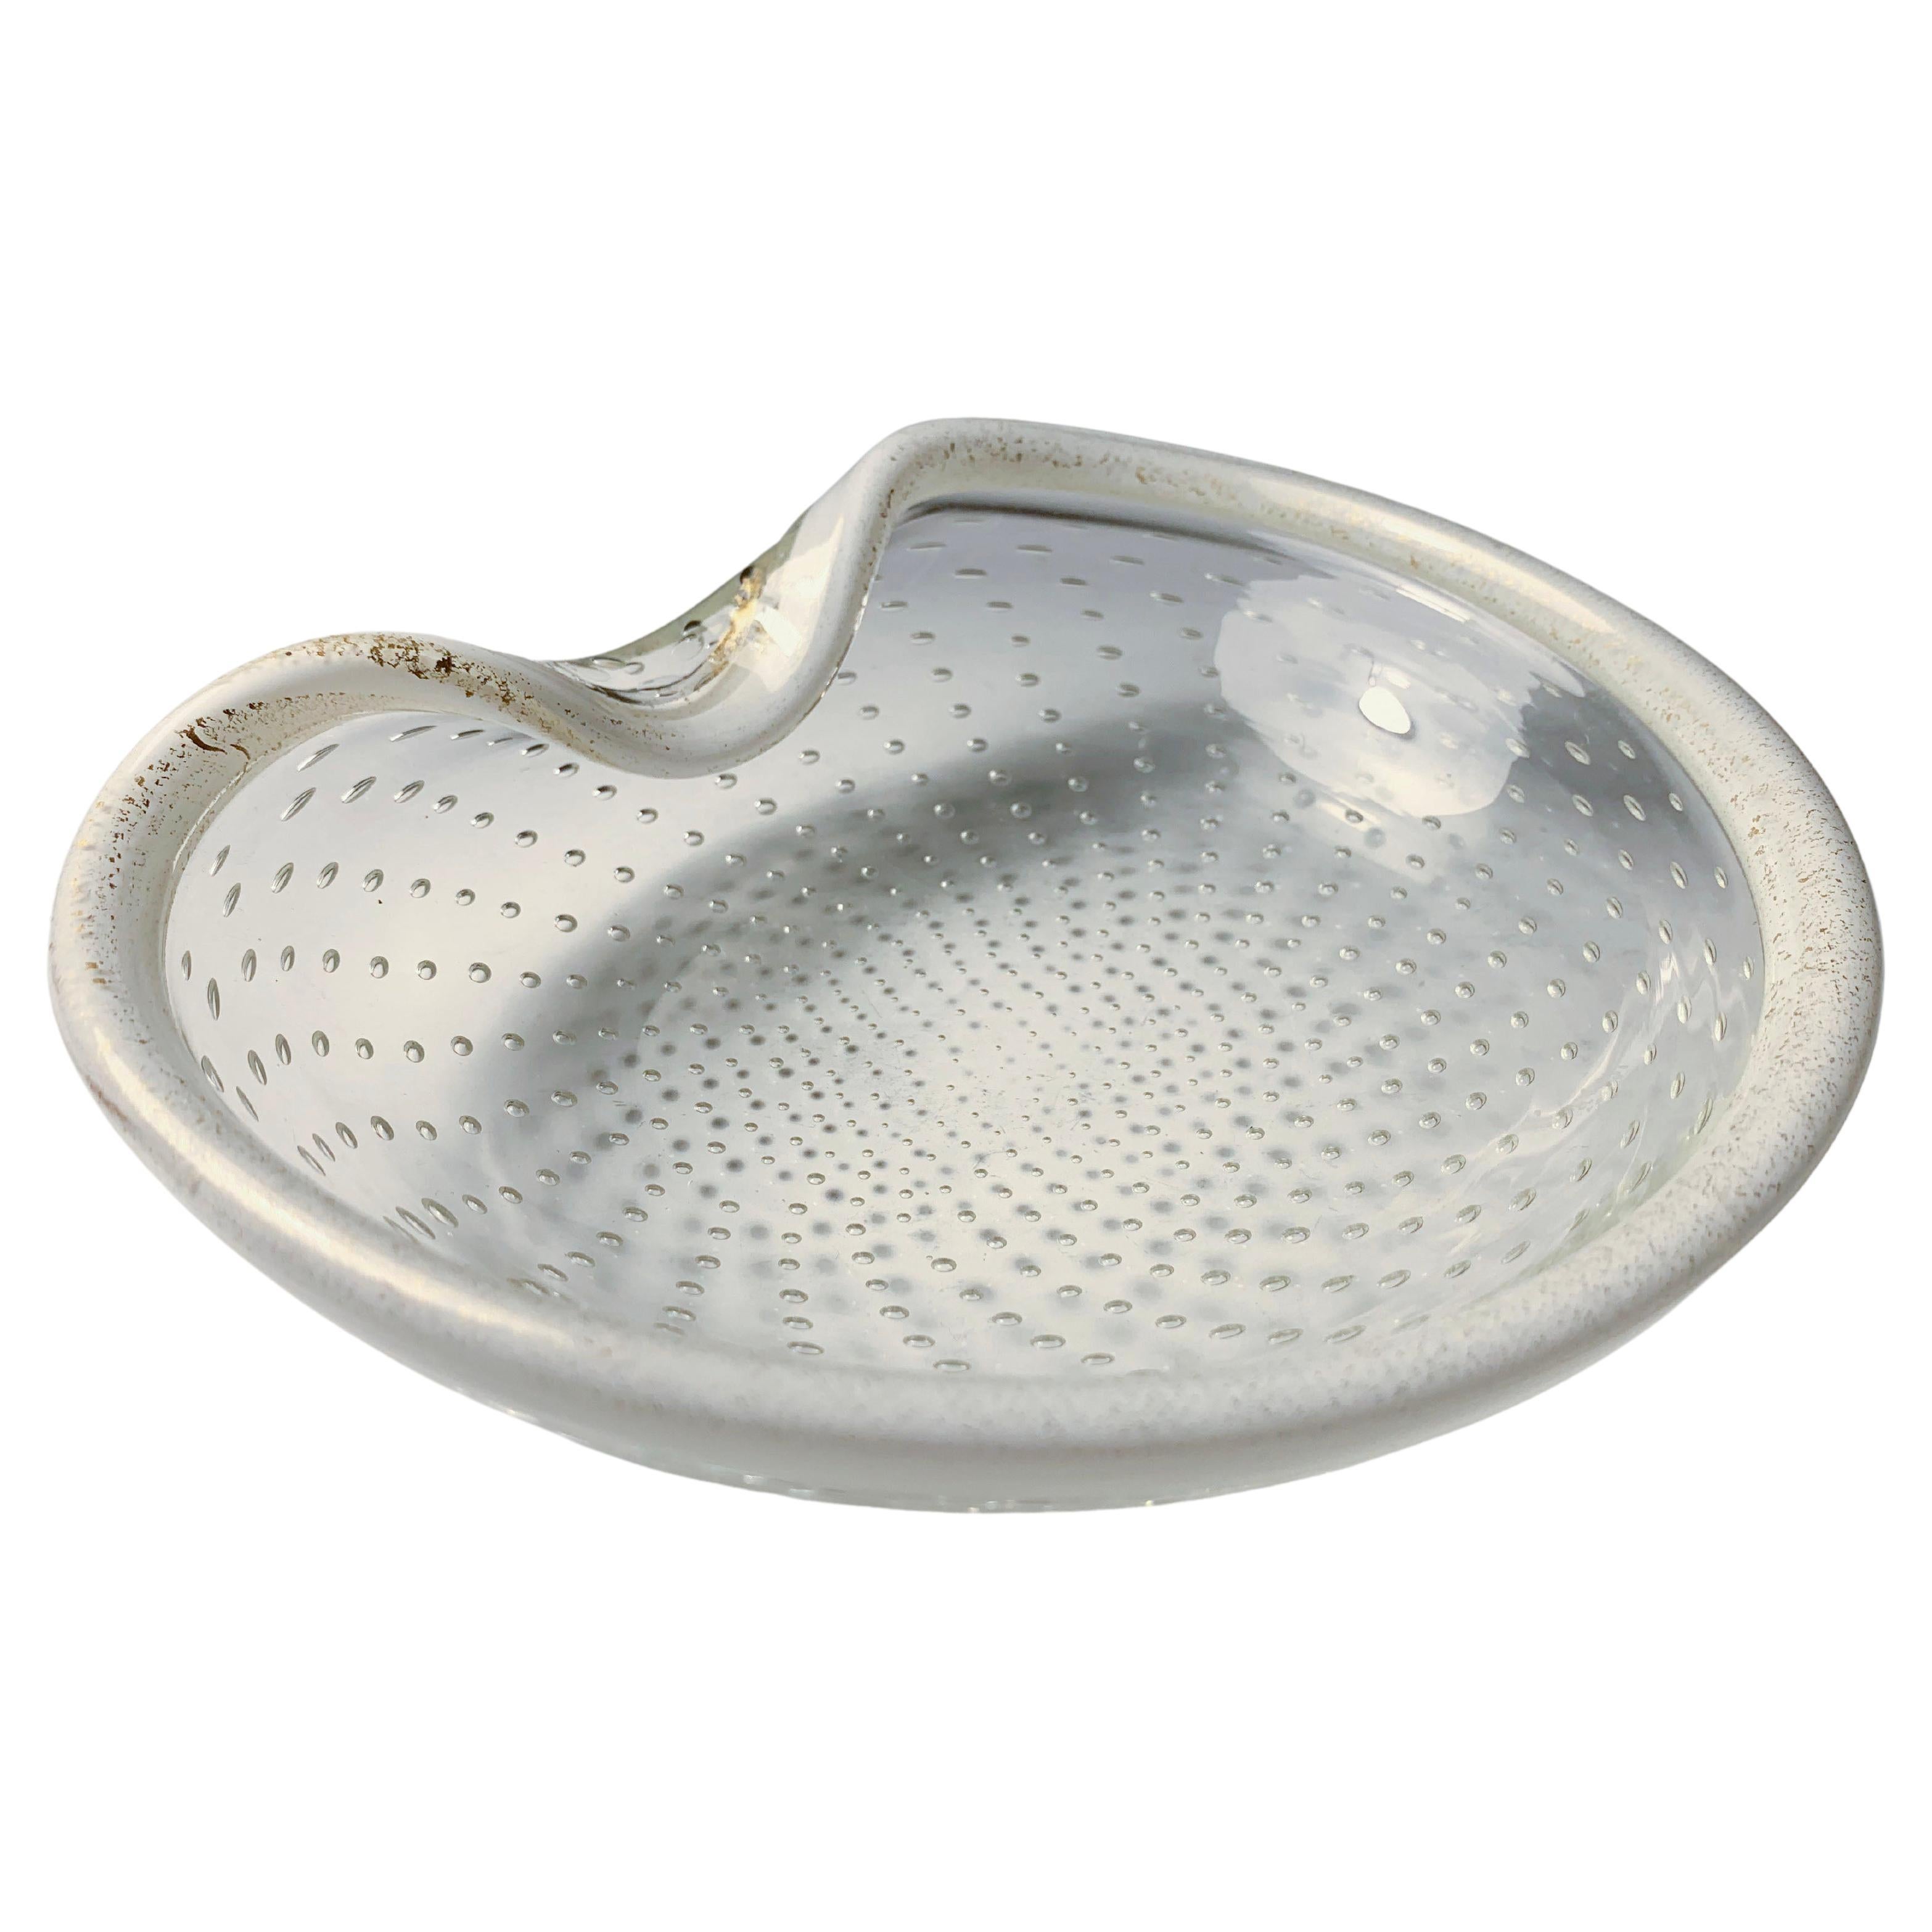 Murano Controlled Bubble Glass Bowl / Ashtray by Barovier & Toso For Sale